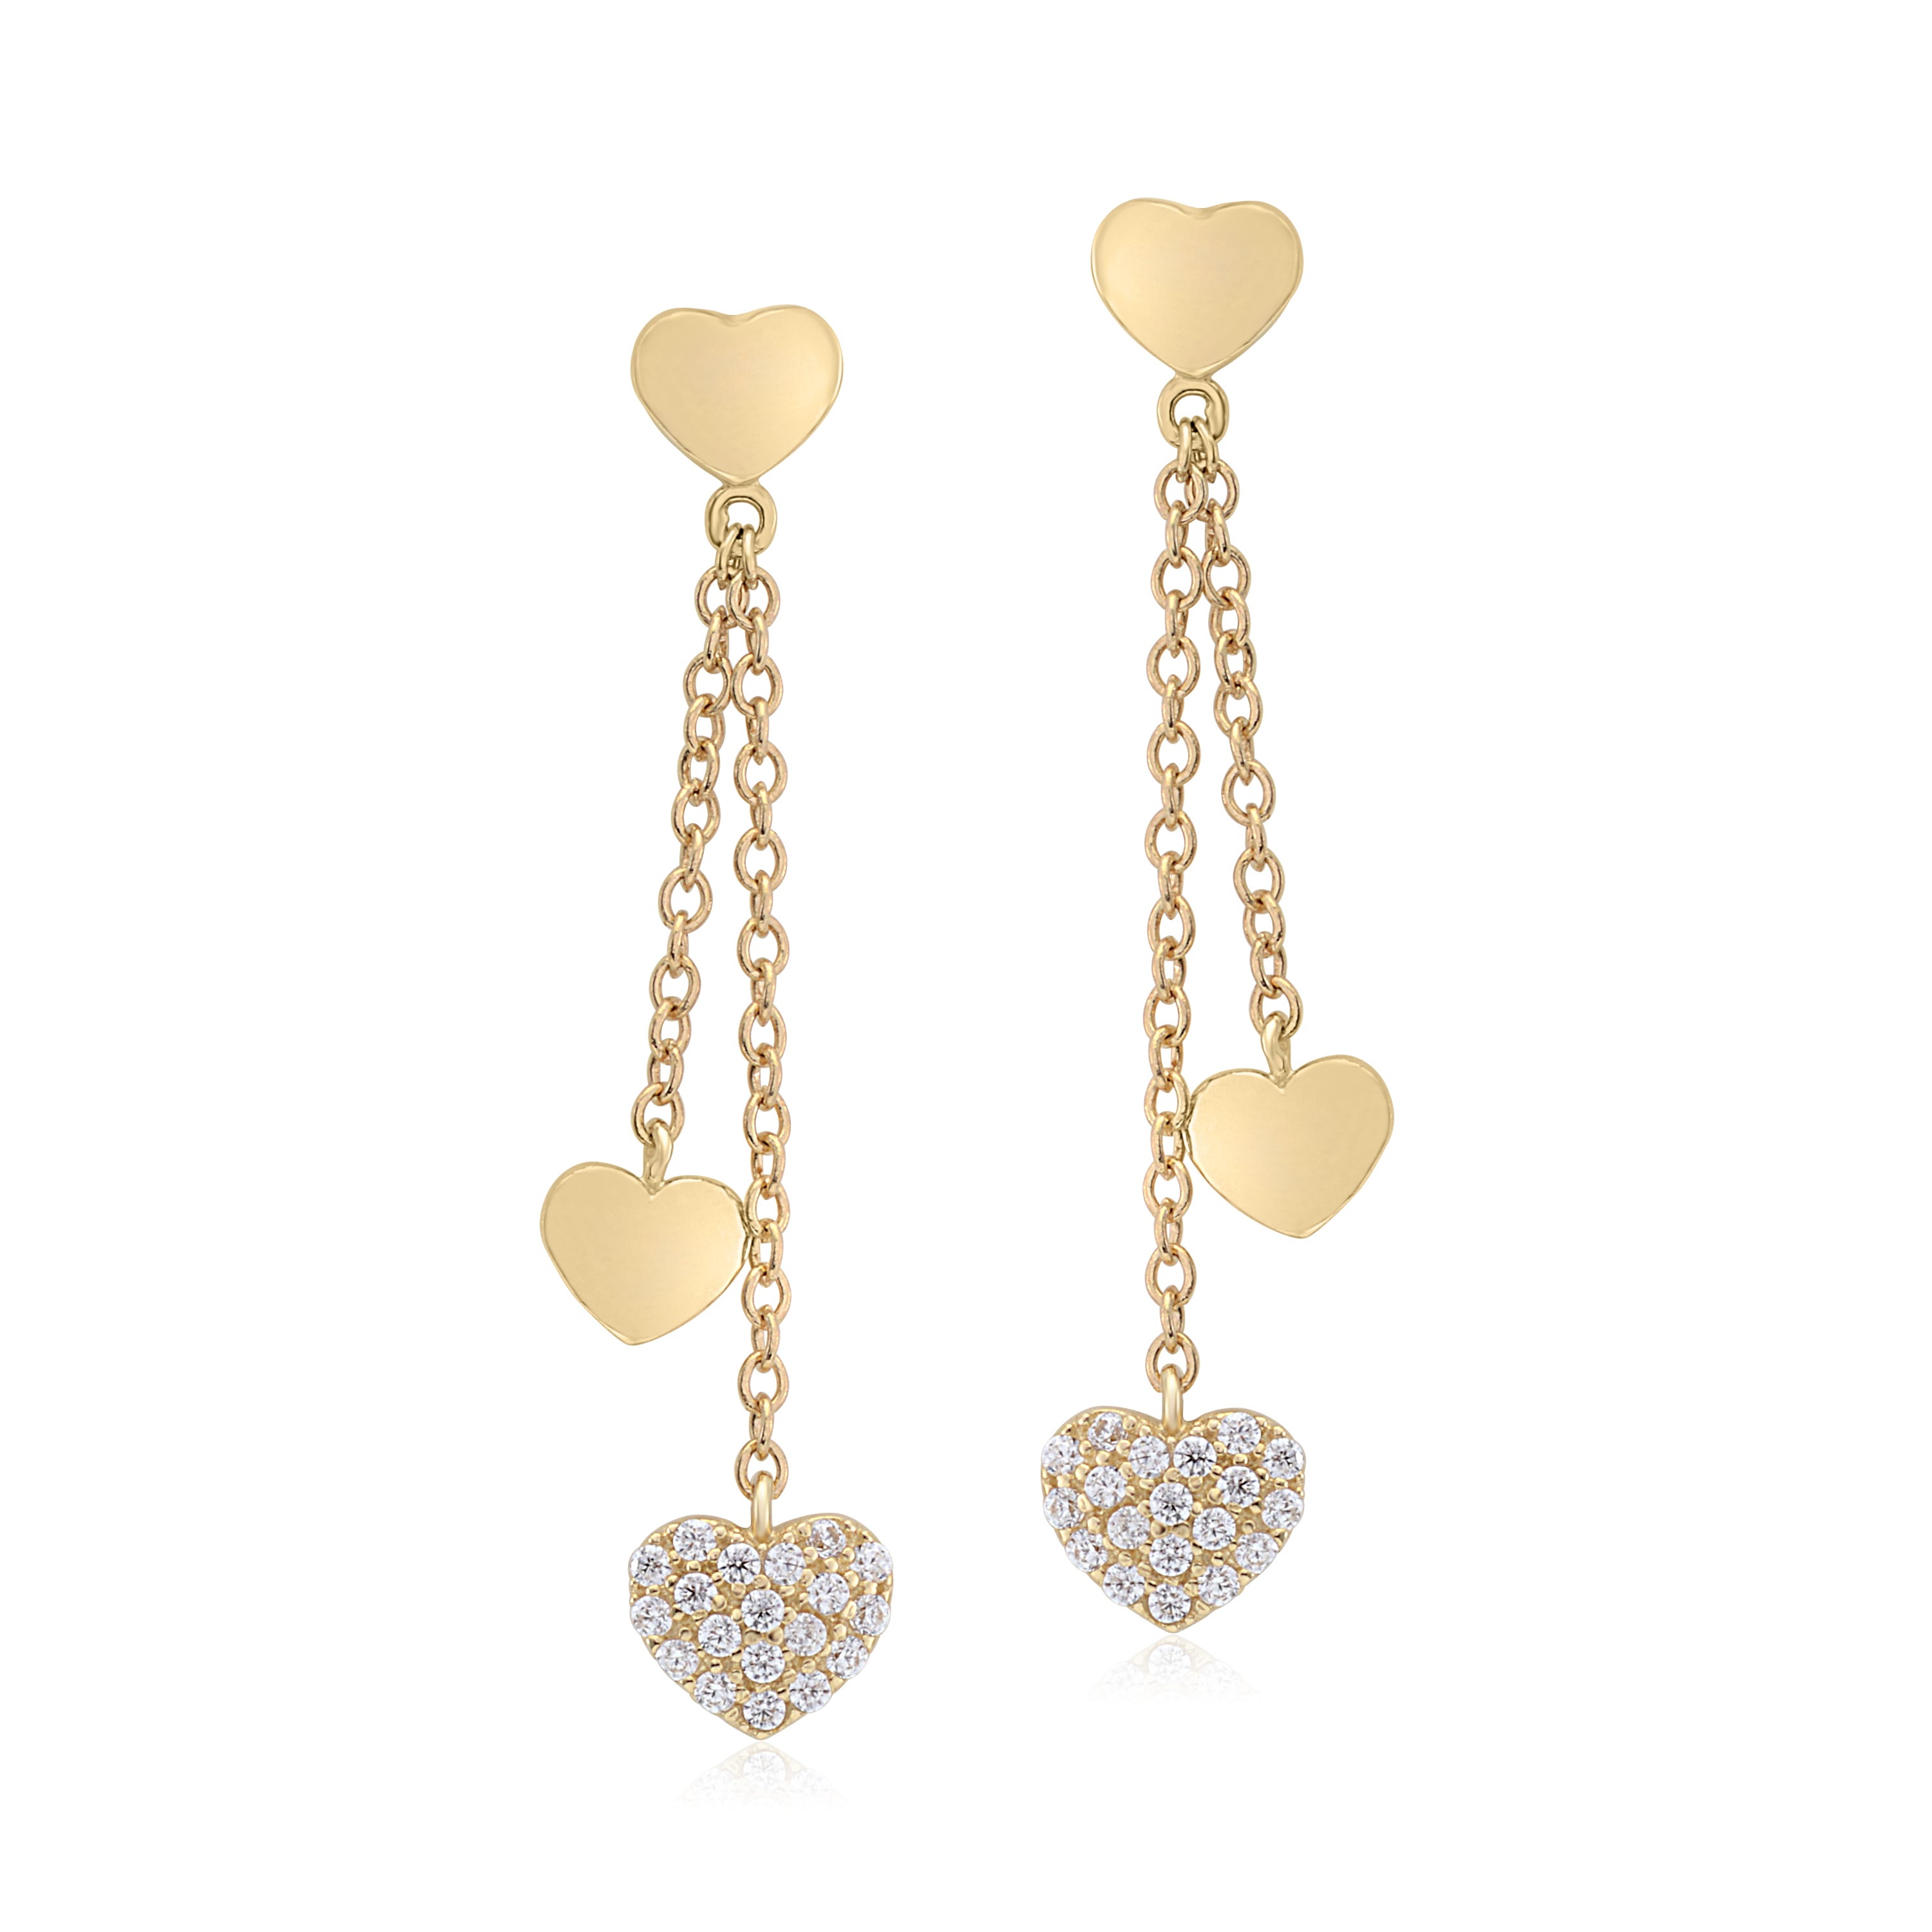 UNICORNJ 14K Yellow Gold Polished and Pave CZ Long Double Dangle Drop Heart Earrings Italy